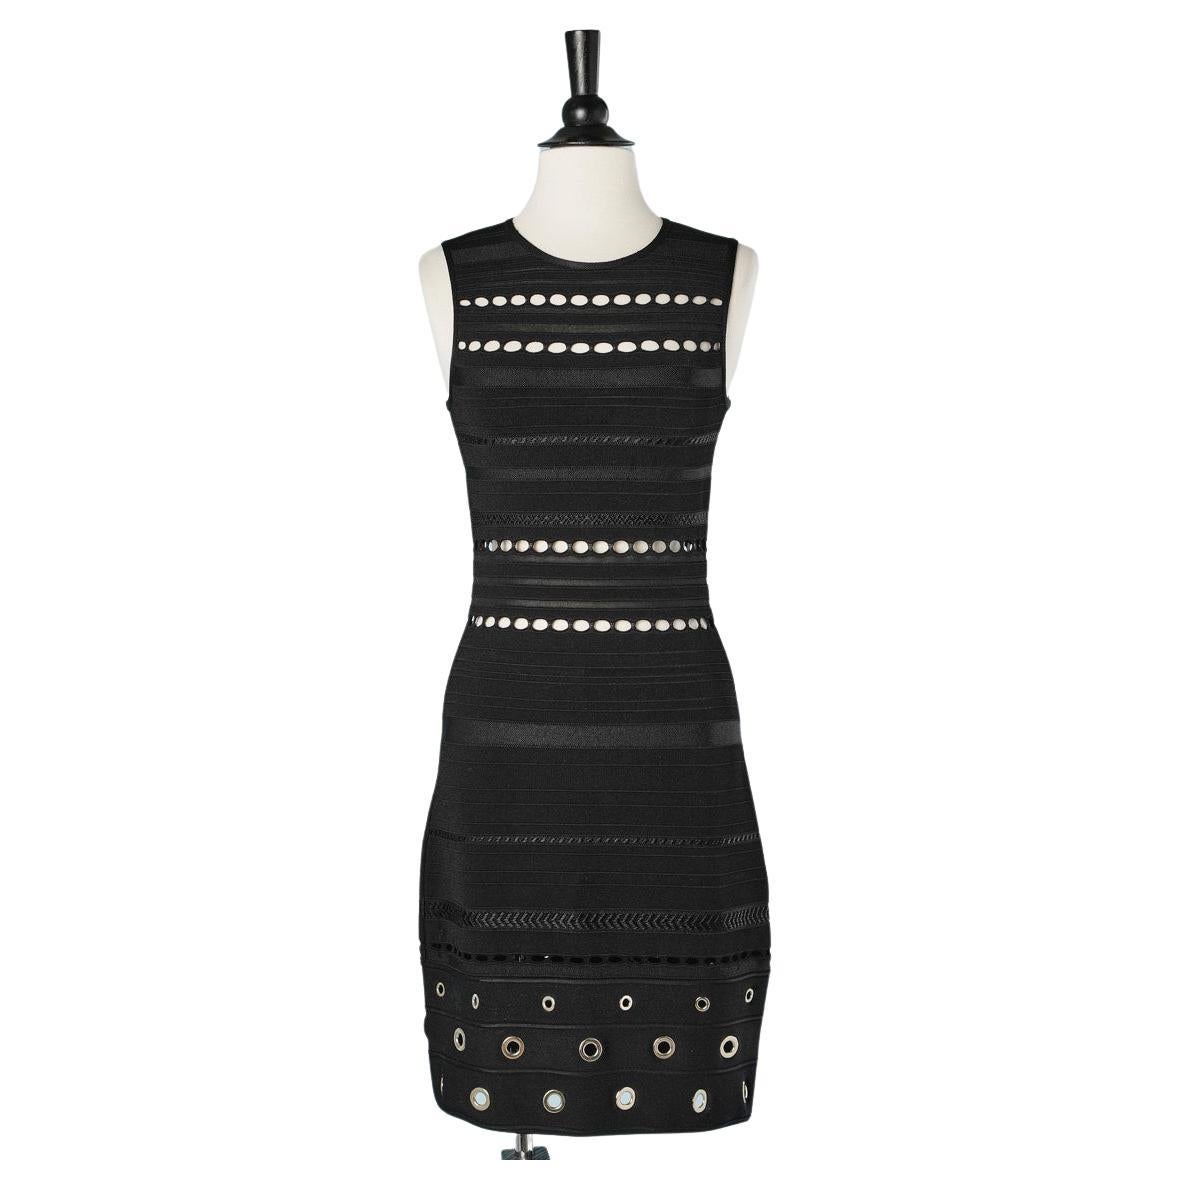 Black rayon knit see-through cocktail dress with gold eyelet  Roberto Cavalli  For Sale